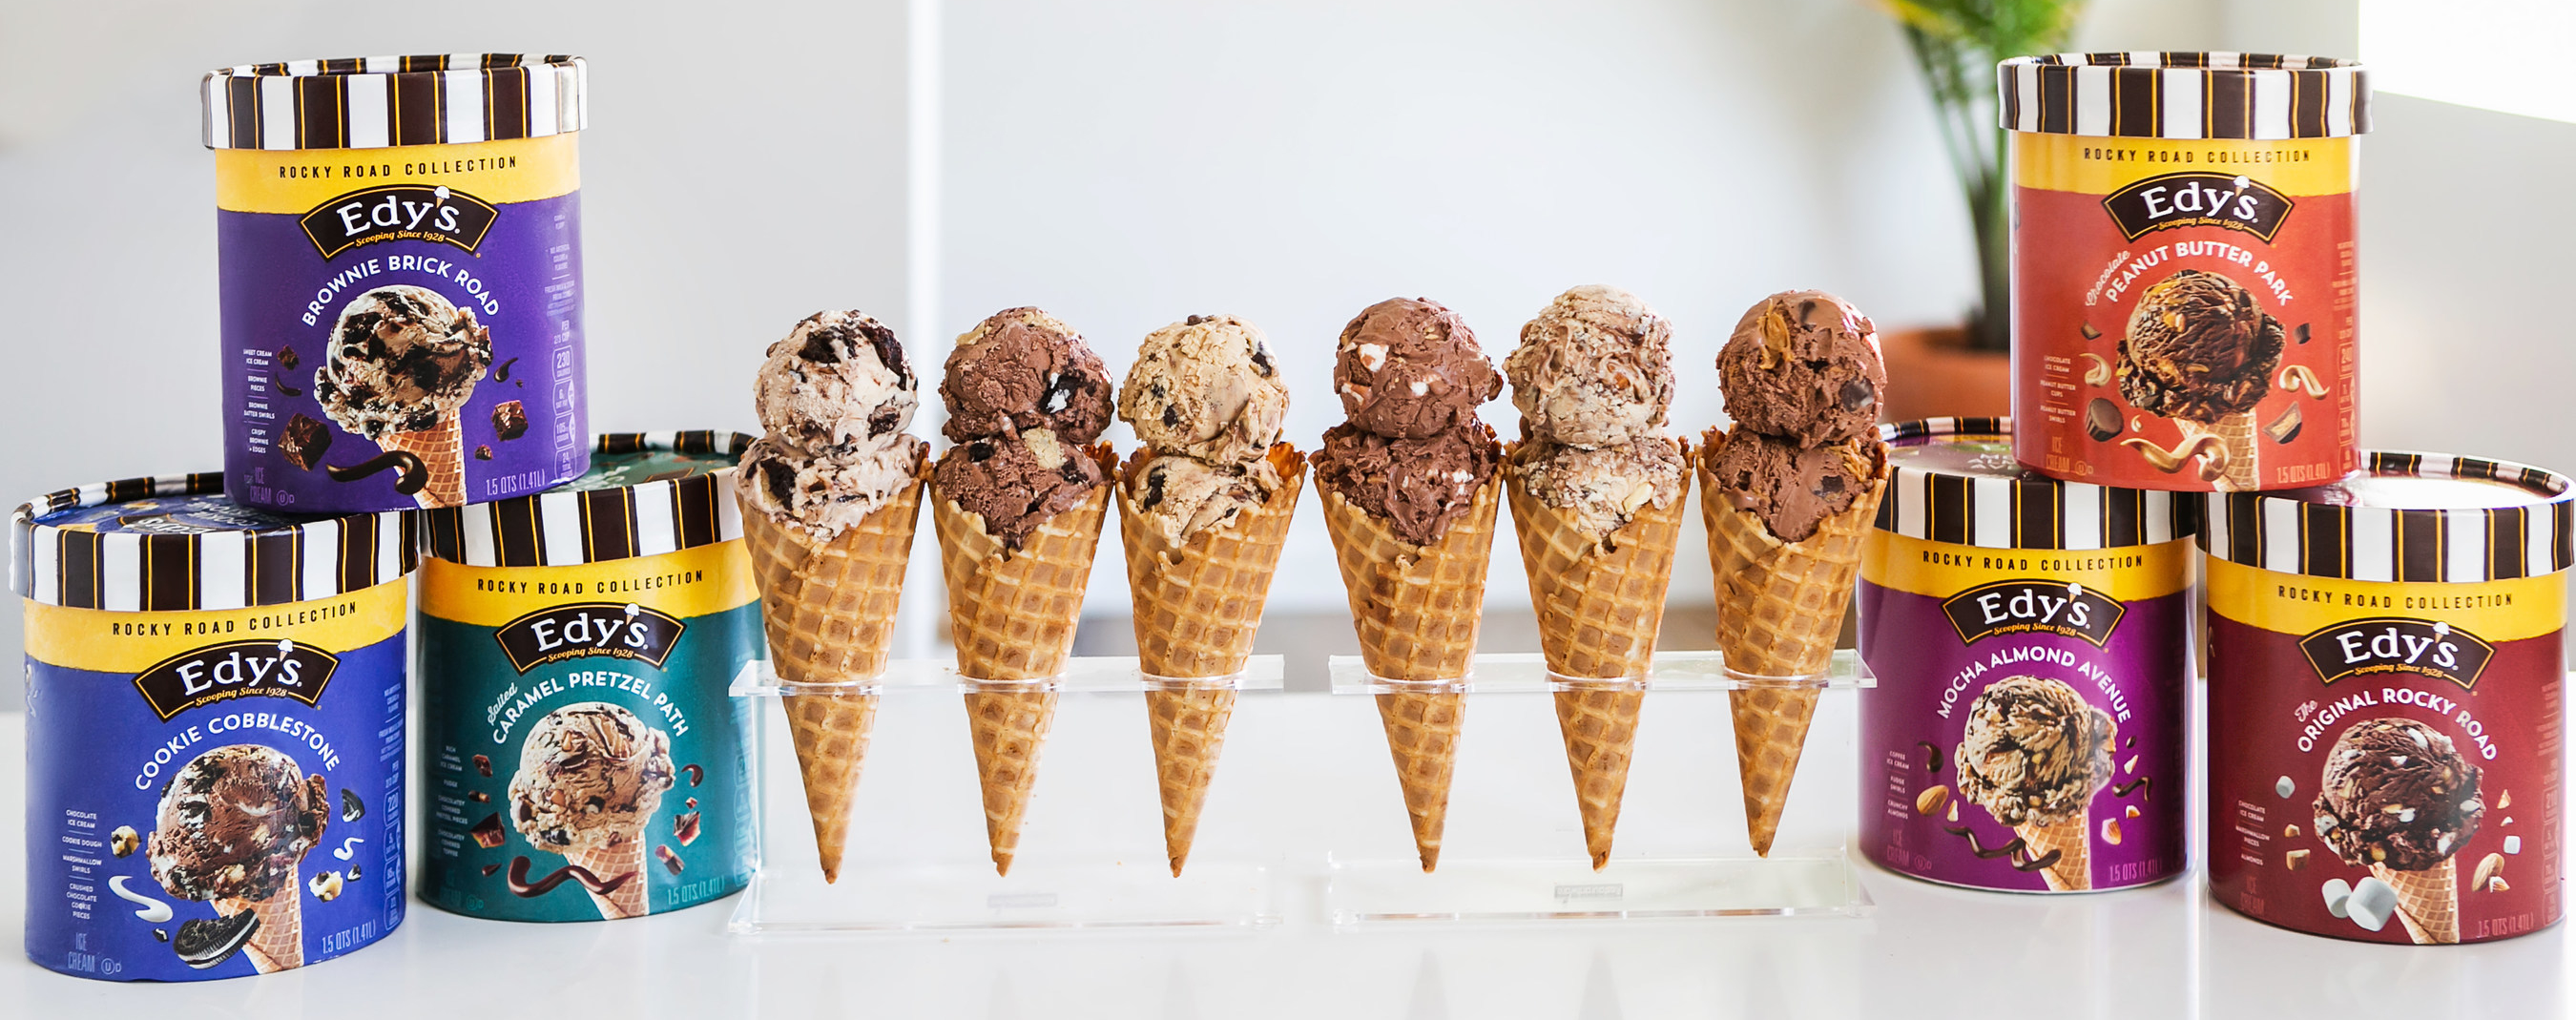 Edy’s/Dreyer’s Rocky Road Collection